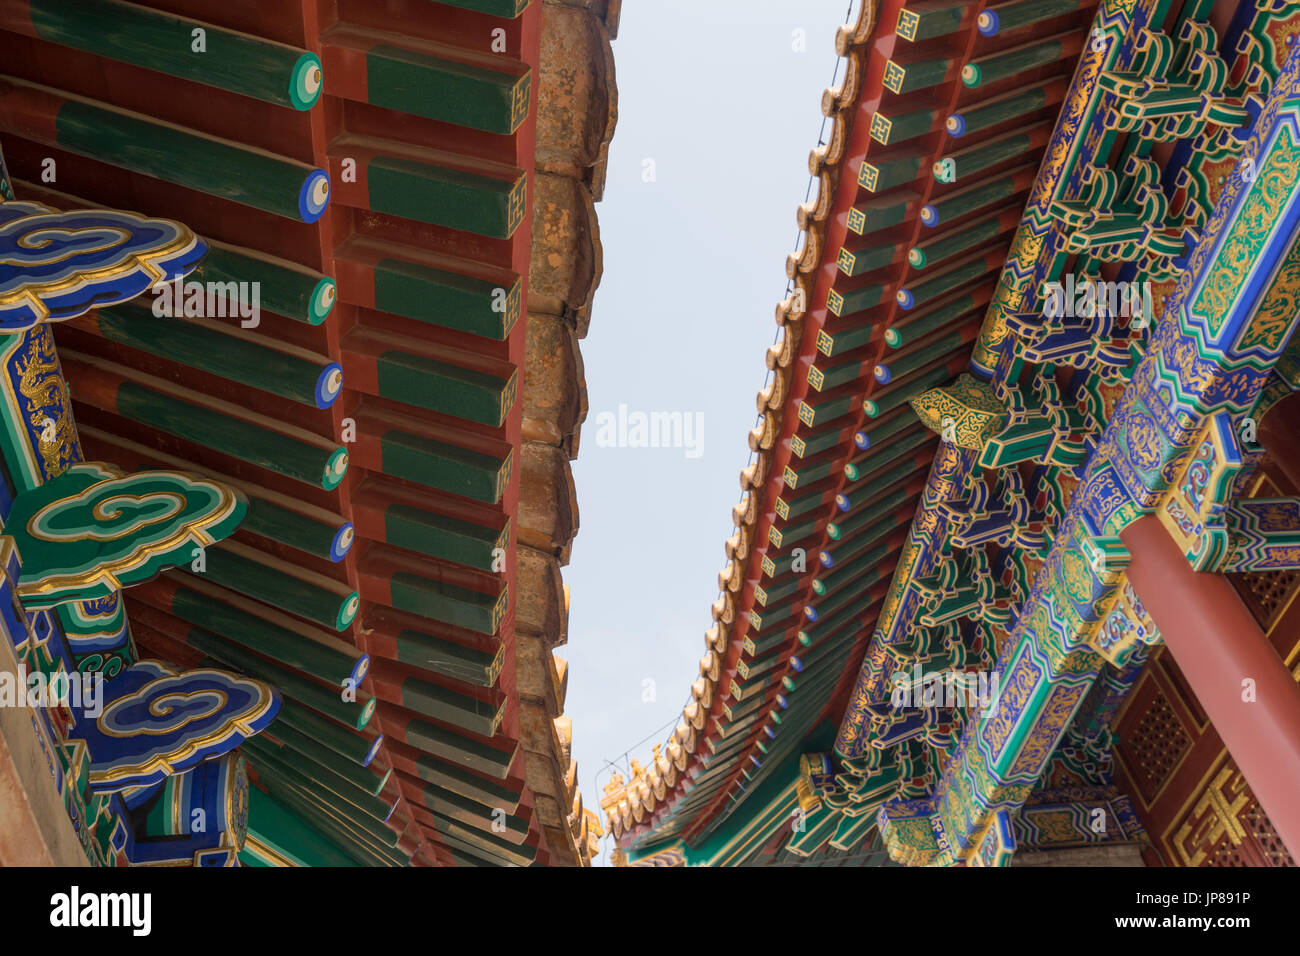 Closeup showing intricate design of roof and eaves of Summer Palace building in Beijing China Stock Photo